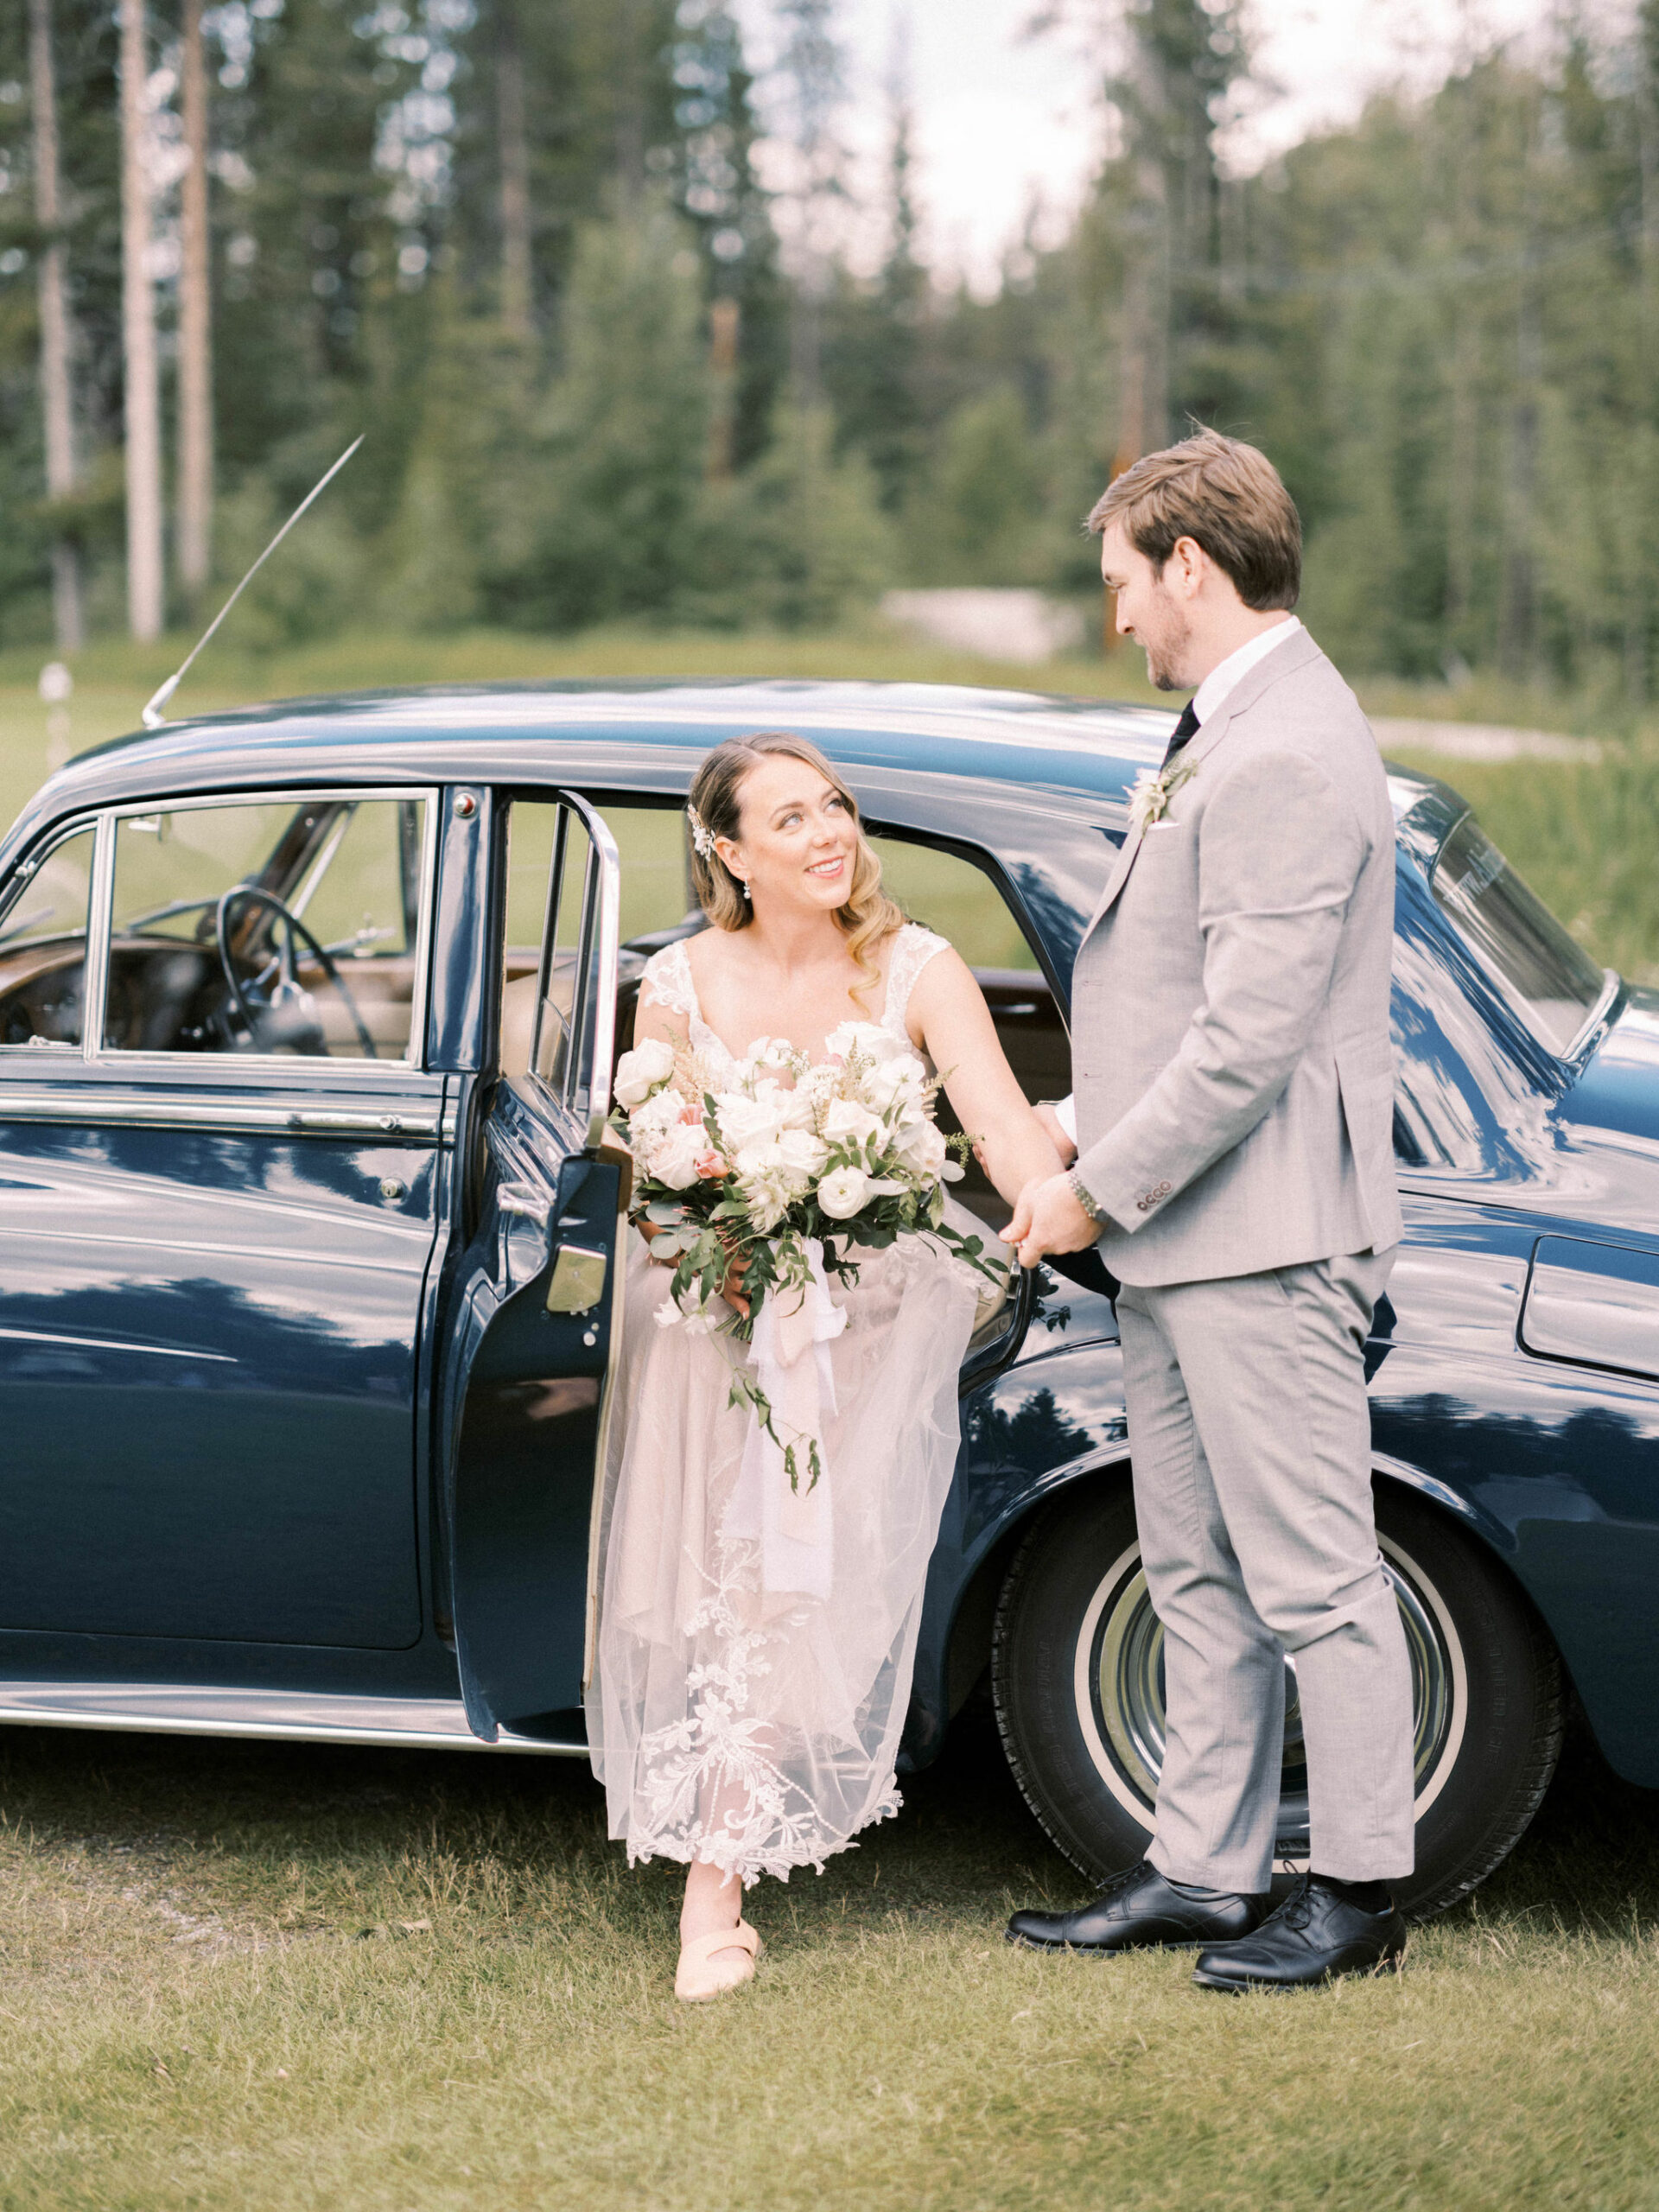 Tips for authentically candid wedding photography, wedding photos, rolls royce wedding, green rolls royce,